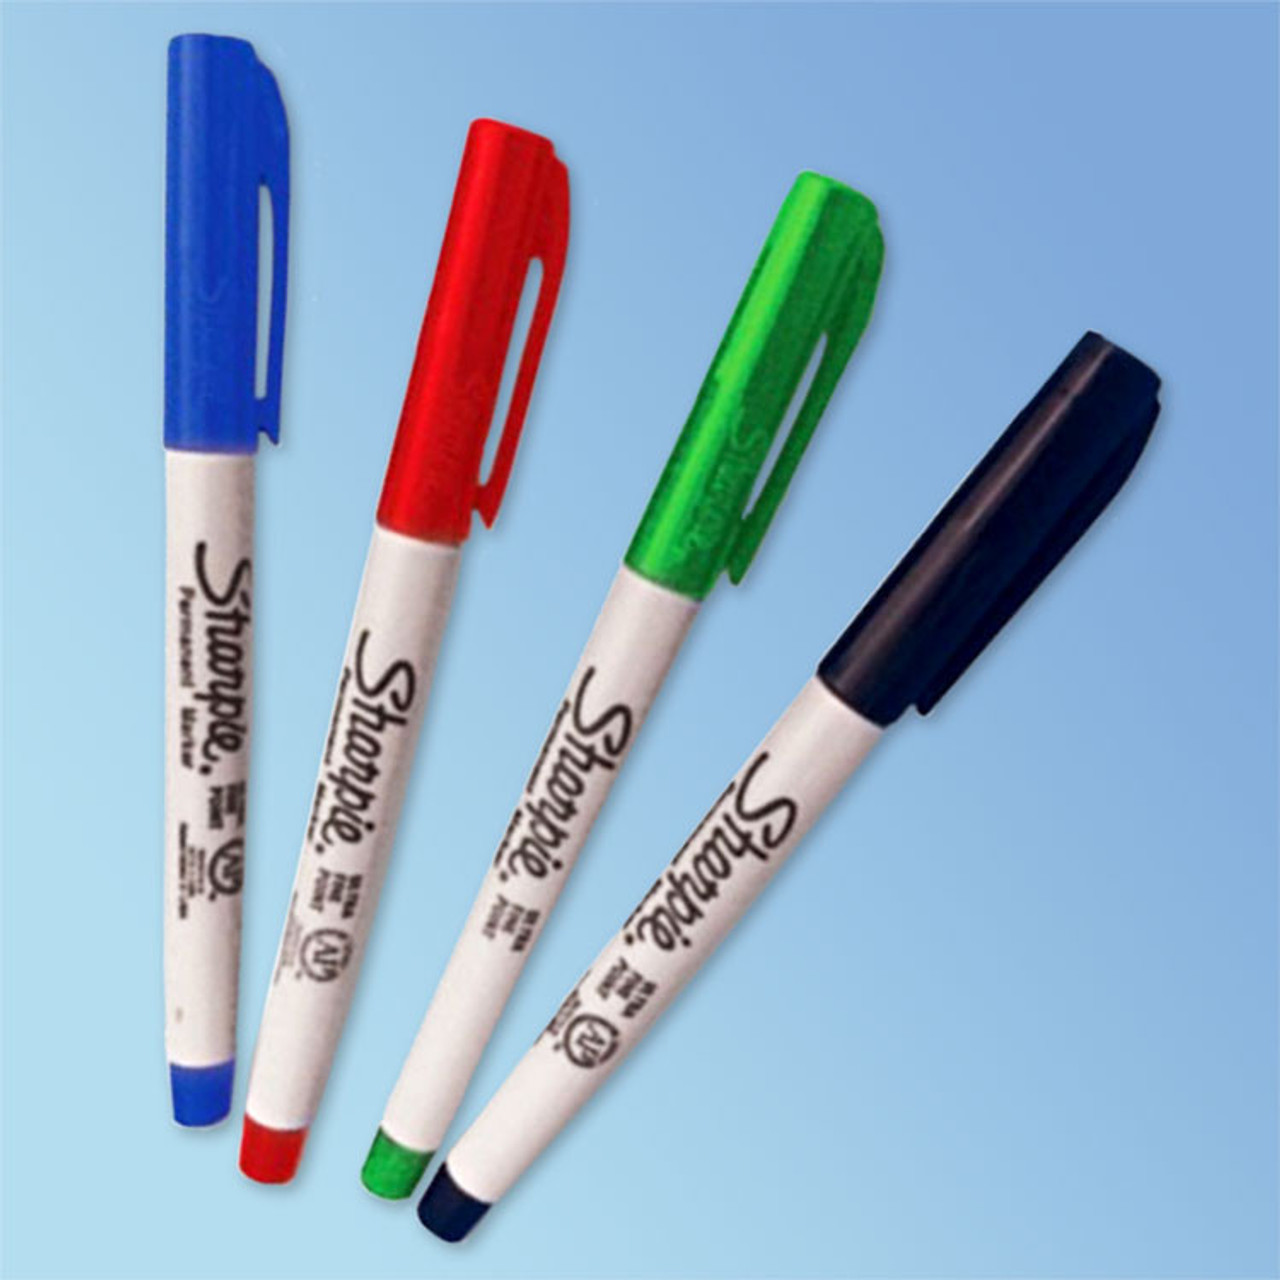 Cleanroom Irradiated Sharpie Markers (Ultra Fine Tip